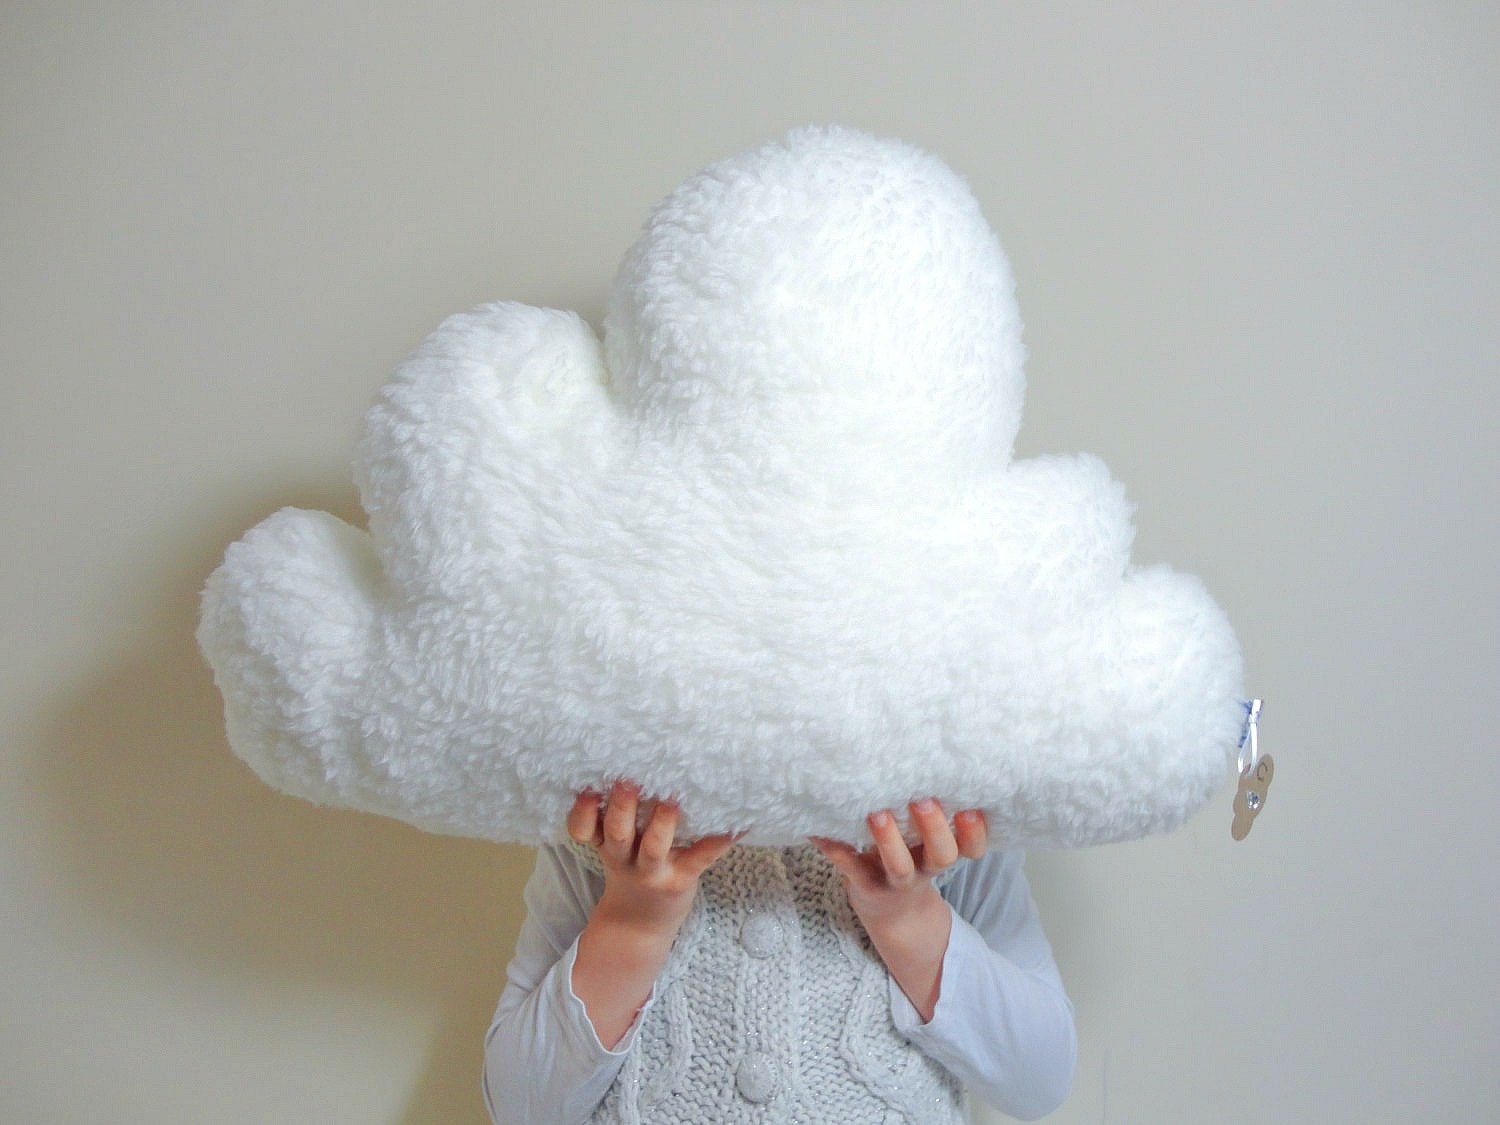 WHITE FLUFFY CLOUD Pillow Cushion Faux Sheepskin Fleece Dreamy, soft and fluffy - Baby Nursery Kids Bedroom Home Decoration